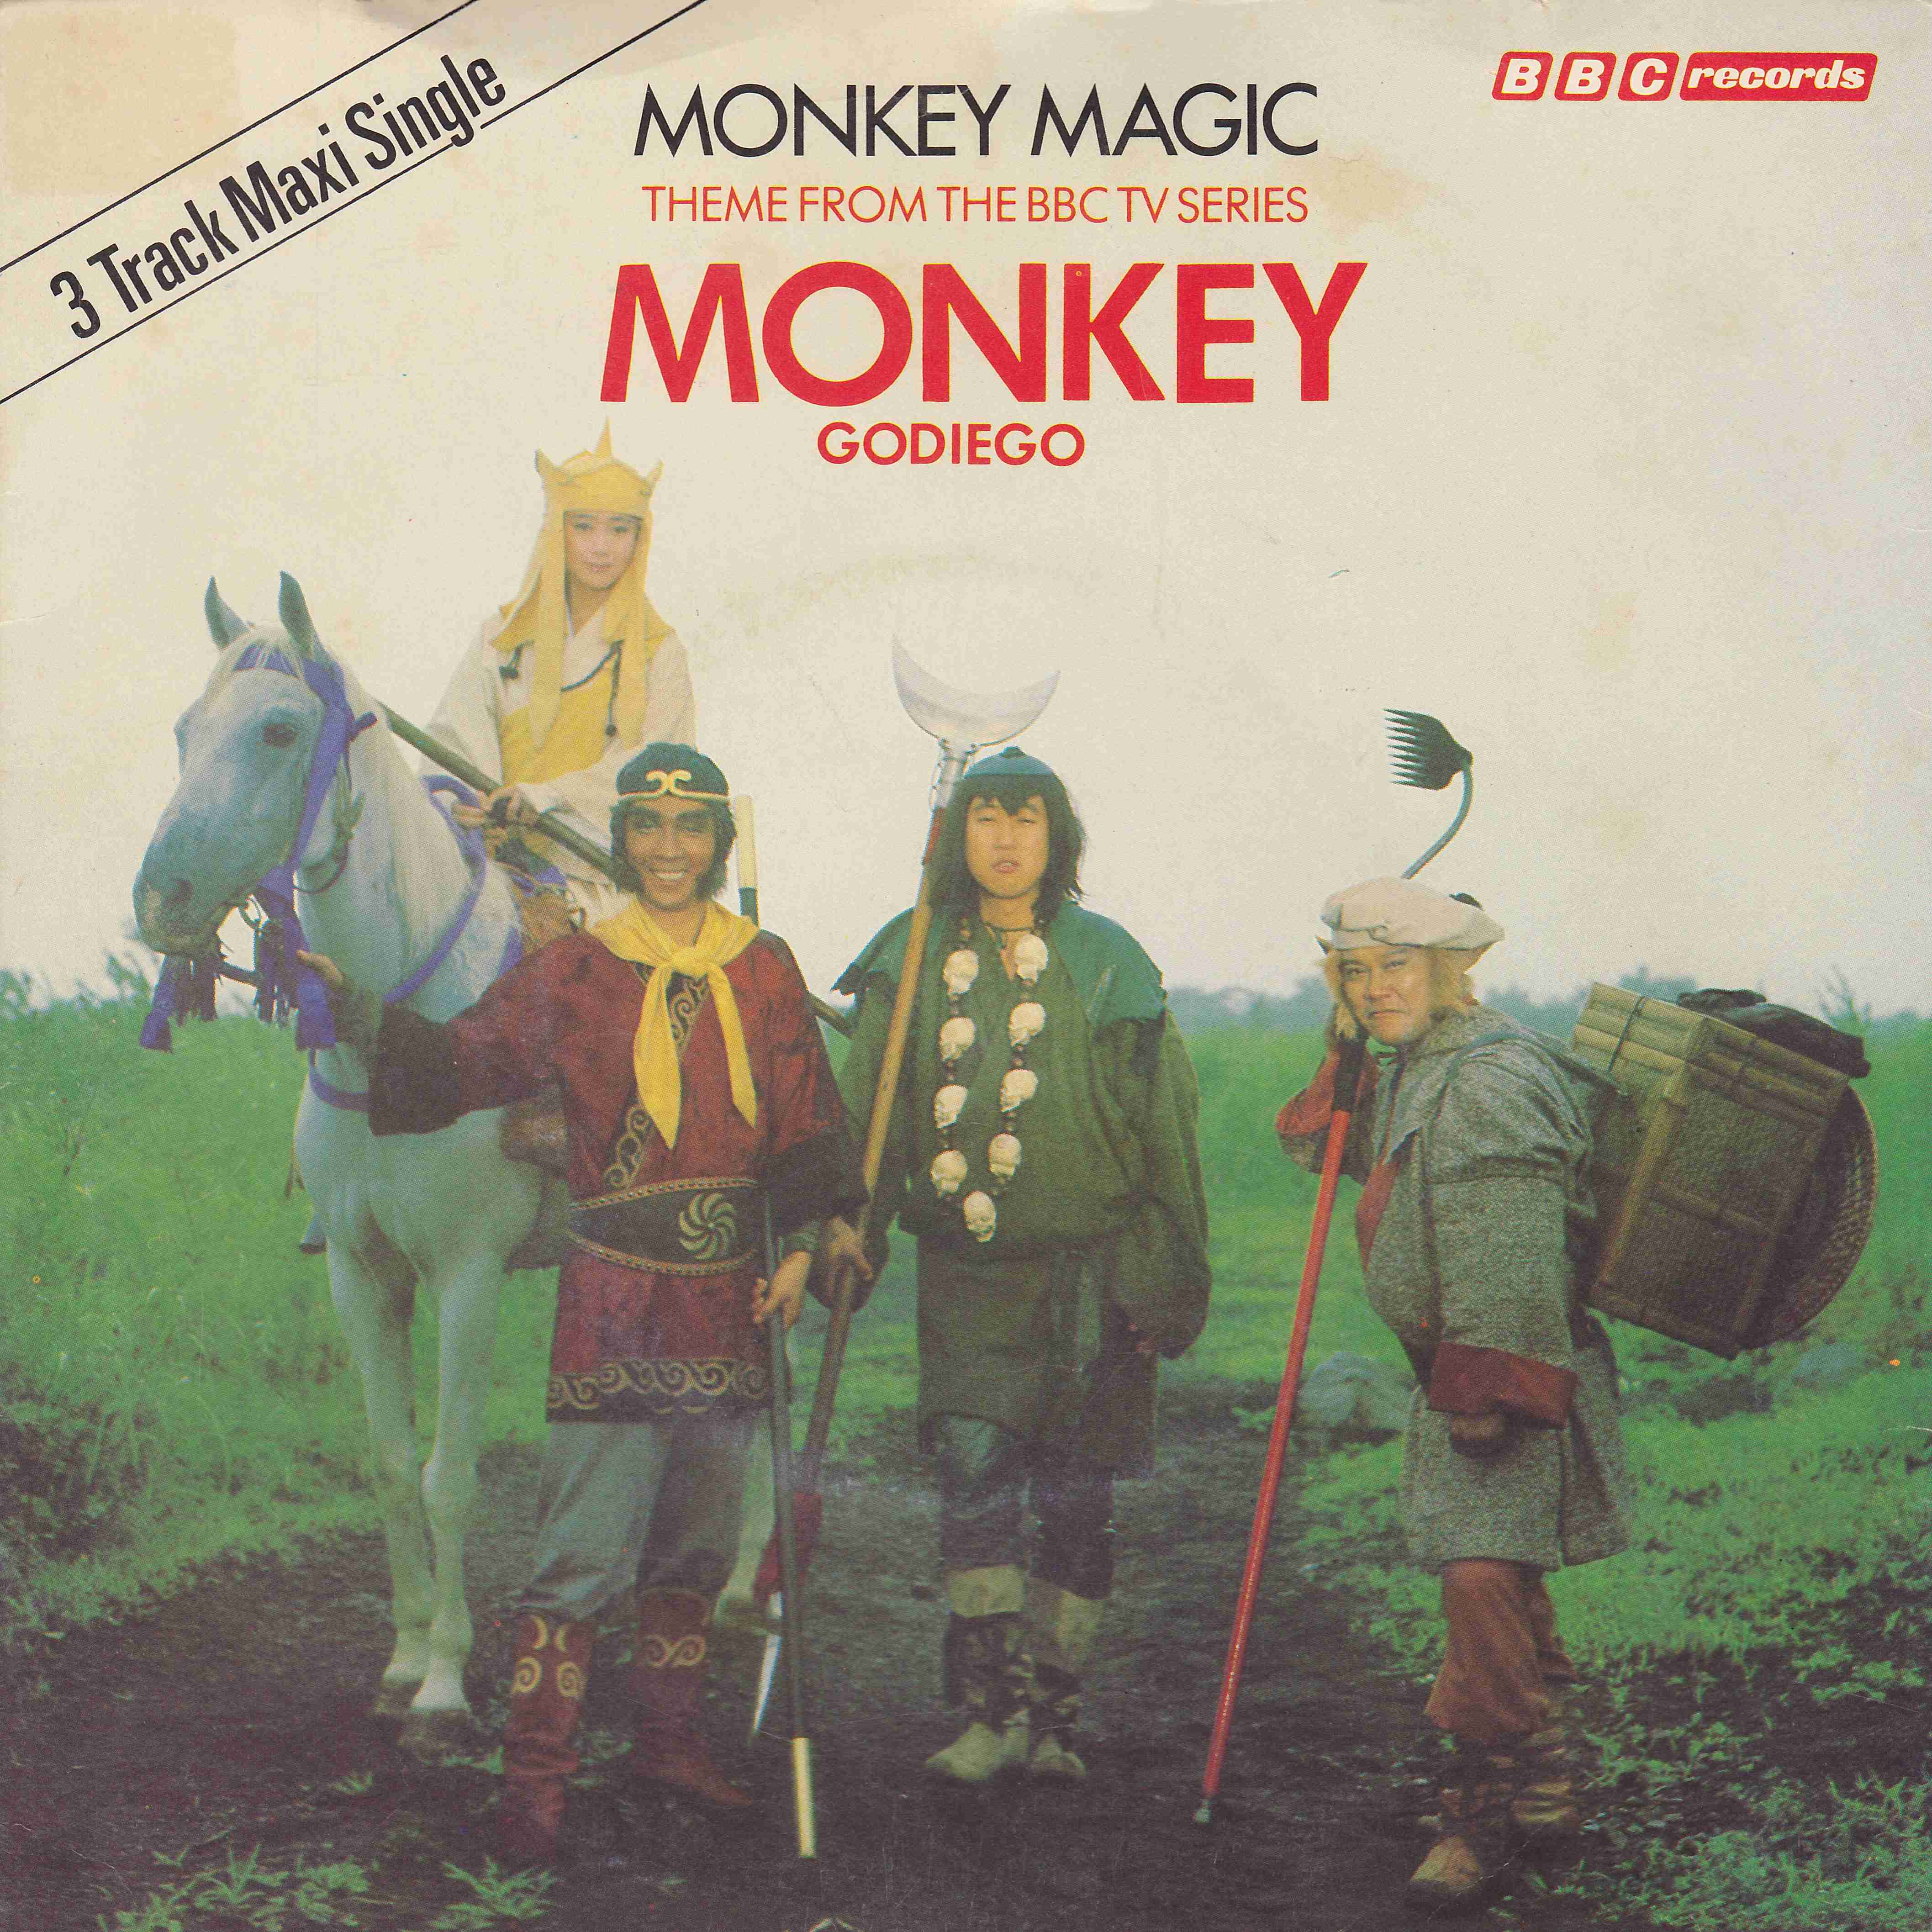 Picture of RESL 81 Monkey magic (Monkey) by artist Narahashi / Takekawa / Godiego from the BBC singles - Records and Tapes library